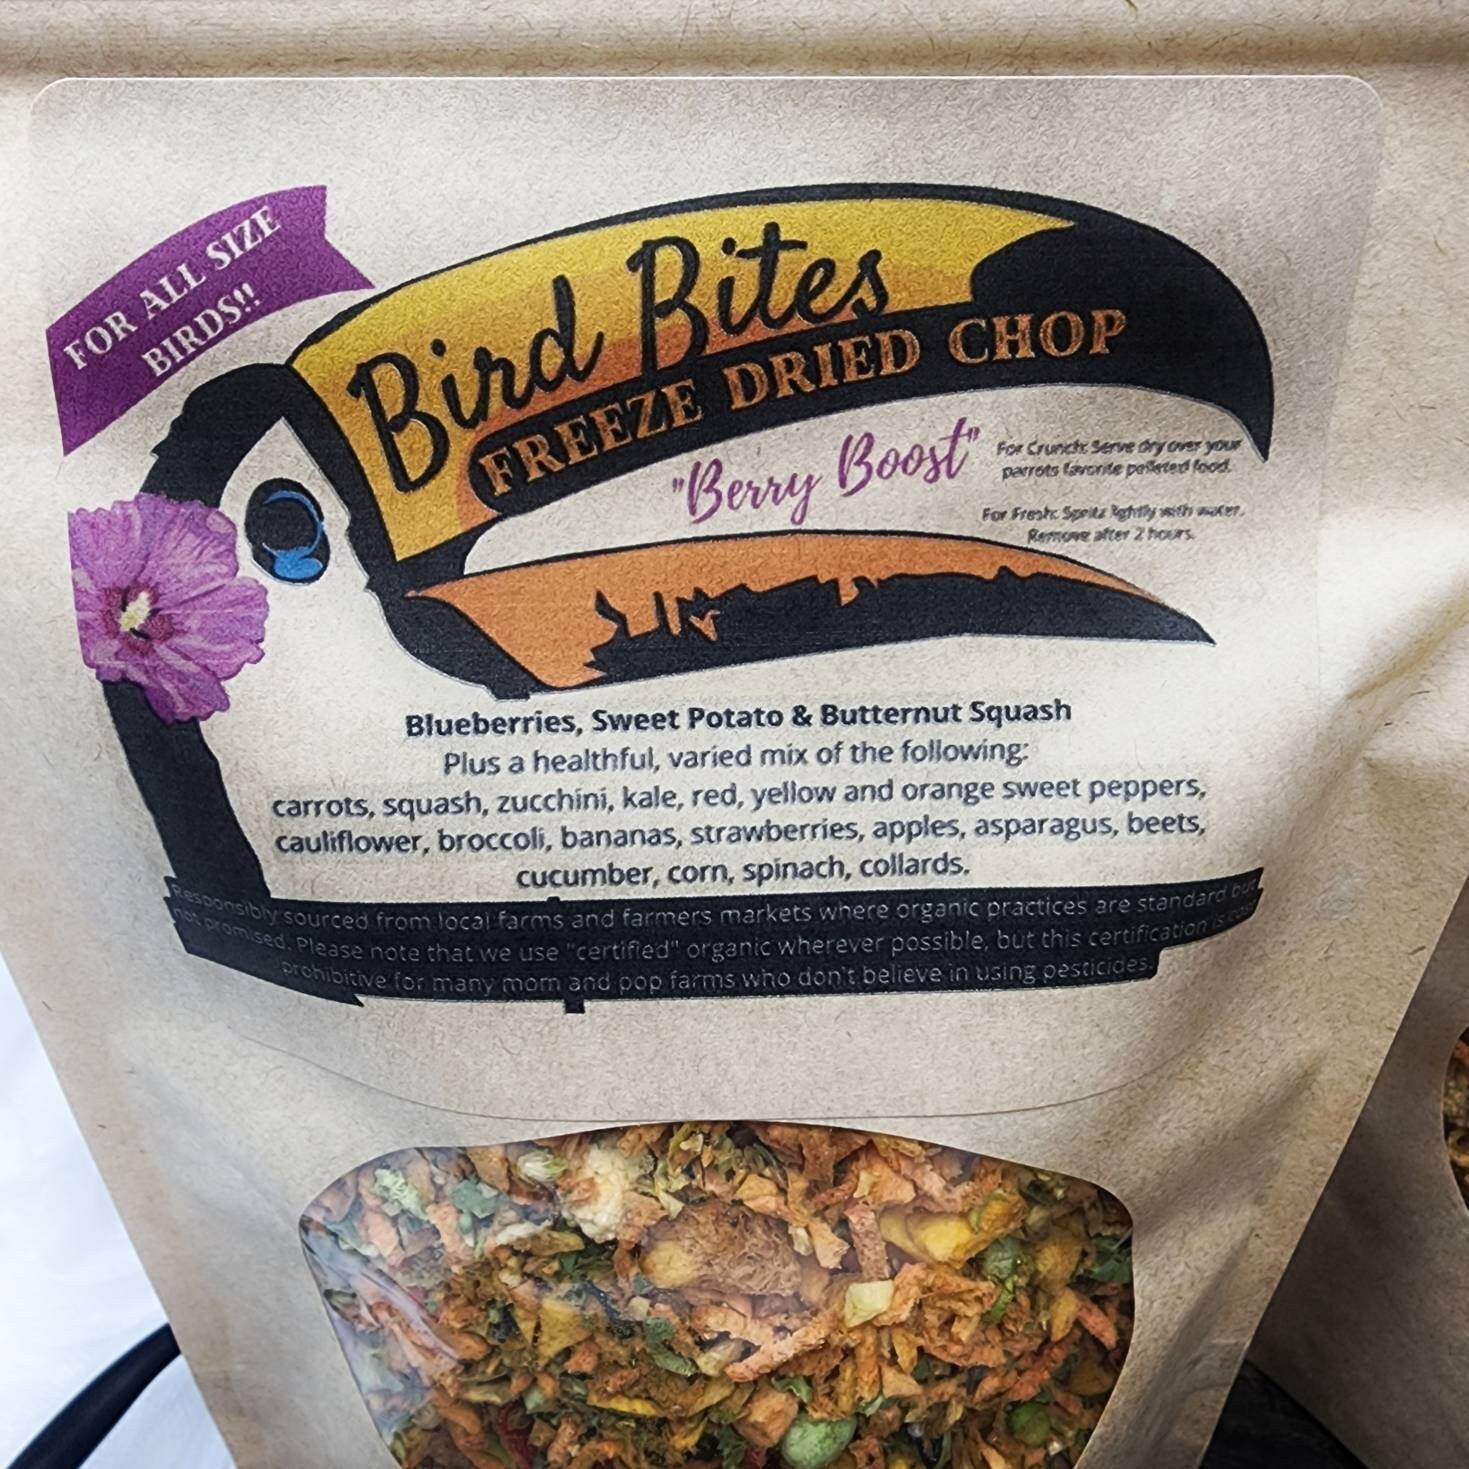 Bird Bites Freeze Dried Chop - Daily Fruits & Veggies, 3 Flavors to Choose From